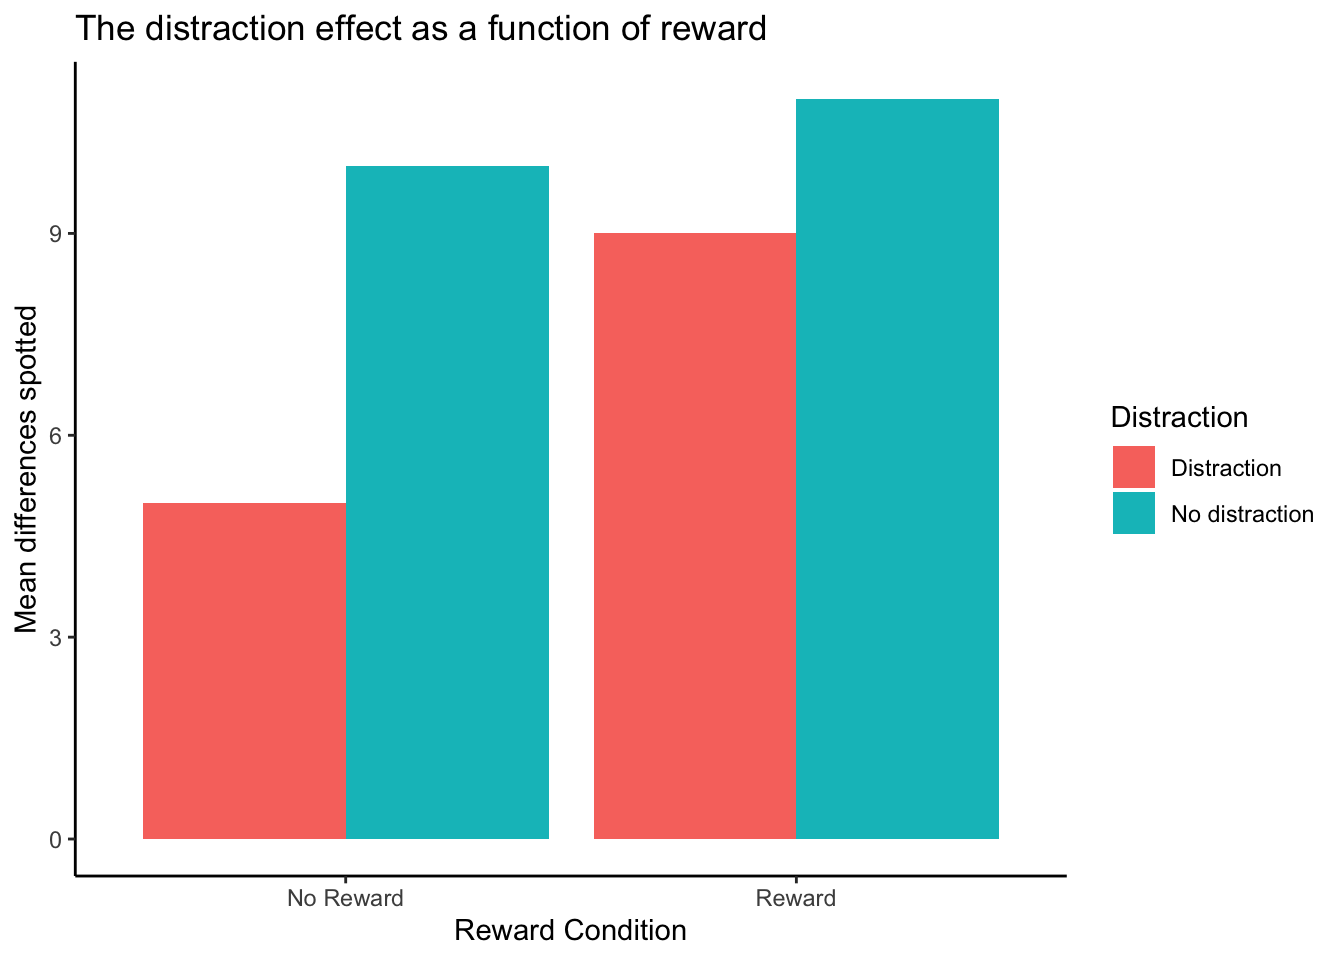 Example data showing how the distraction effect could be modulated by a reward manipulation. Reward condition plotted on the x-axis, makes it easier to compare the changes in the distraction effect between reward conditions